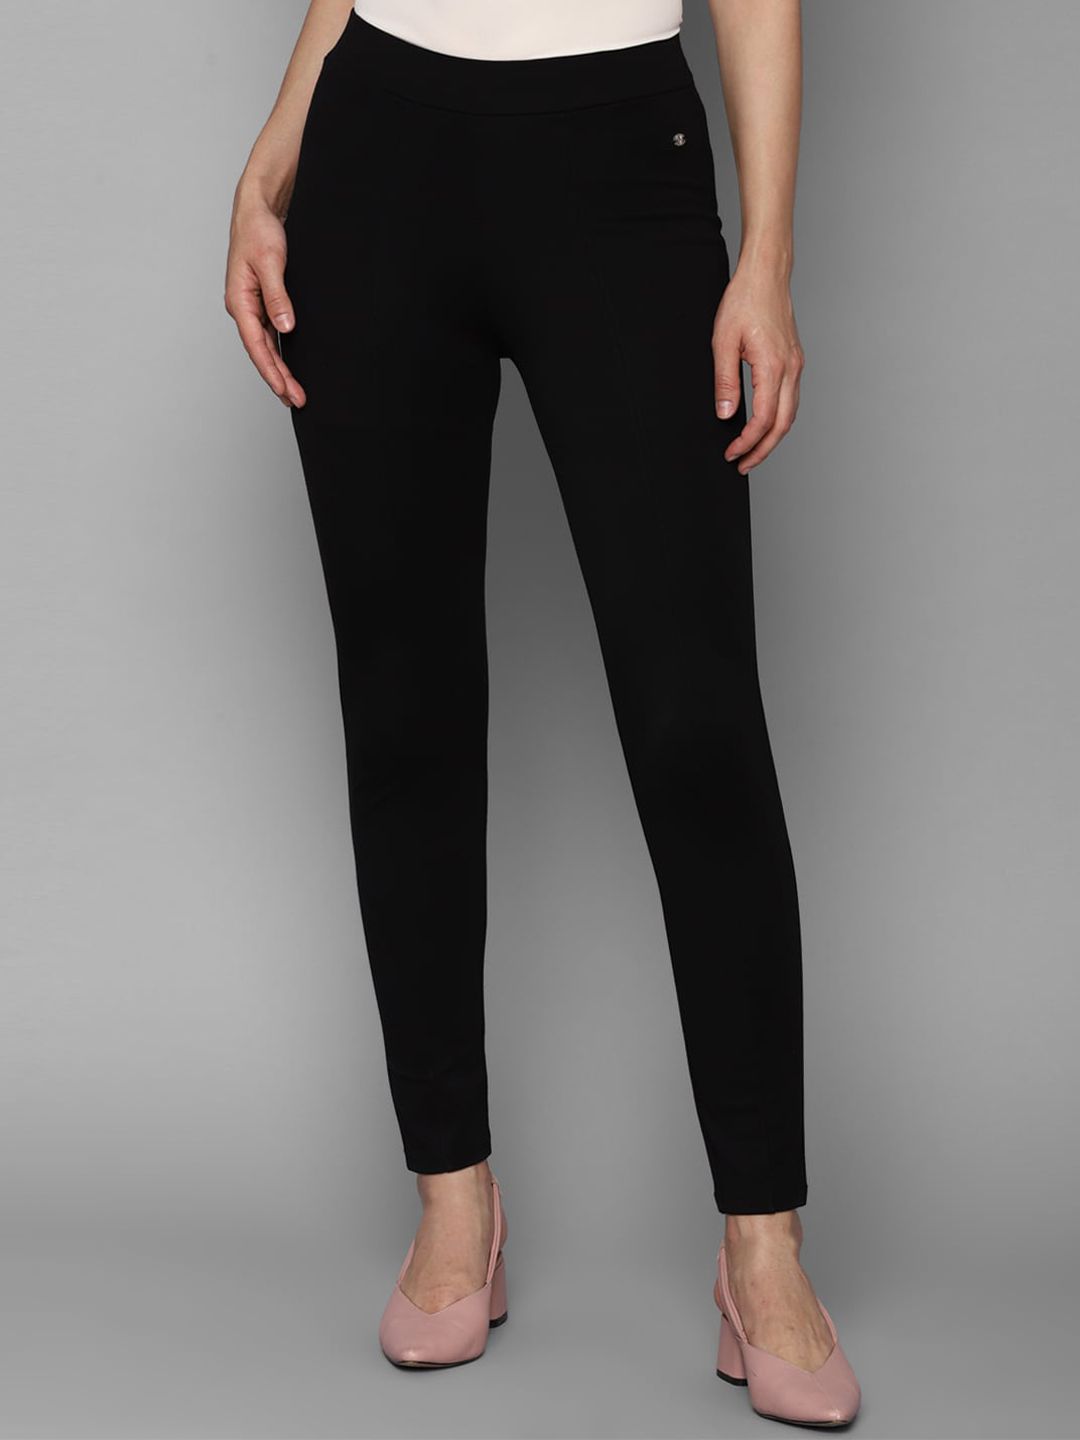 Allen Solly Woman Women Black Solid Trousers Price in India